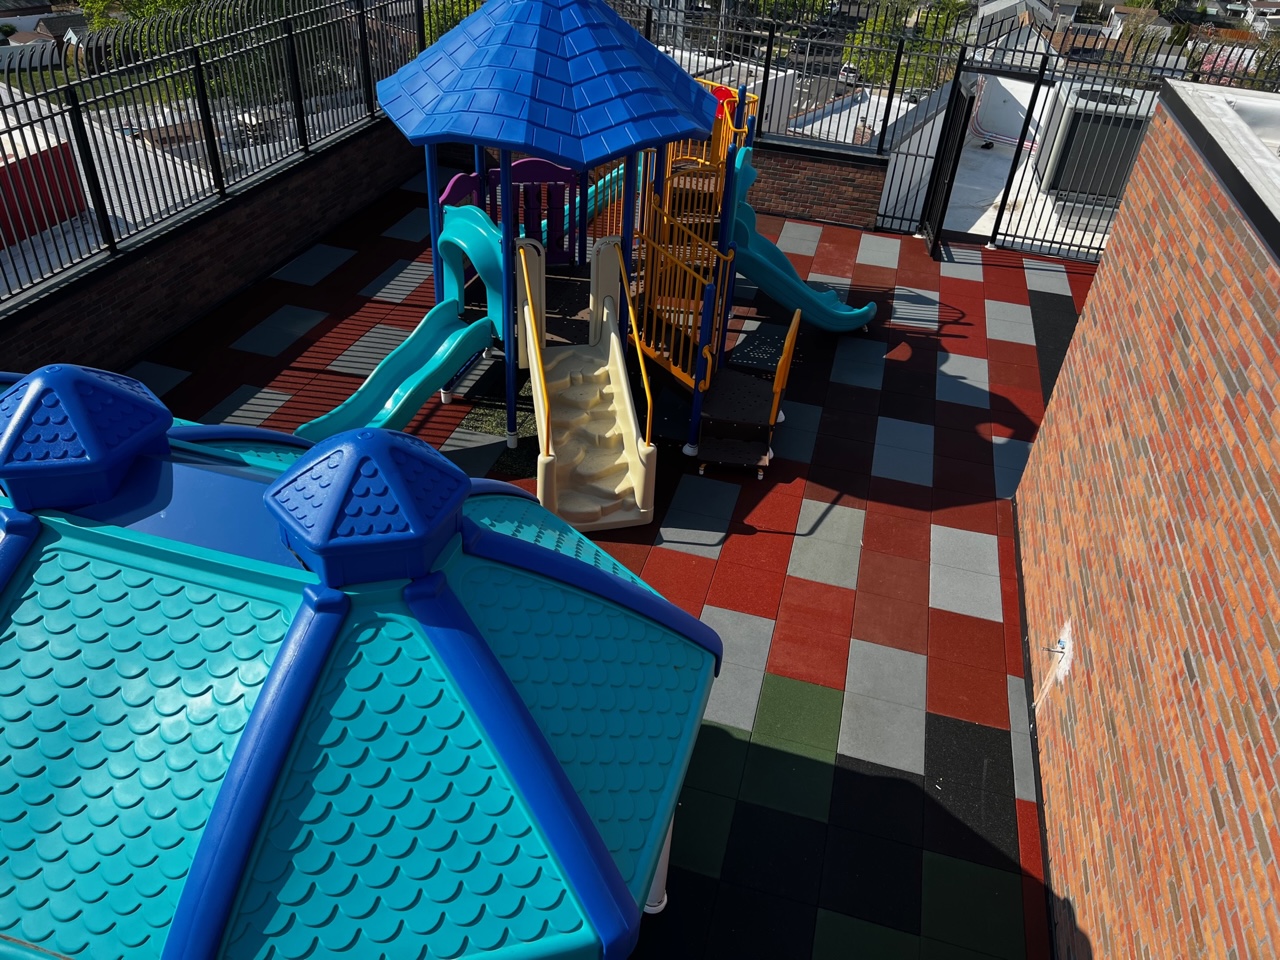 Charter School Rooftop Playground Using Pigmented Tiles